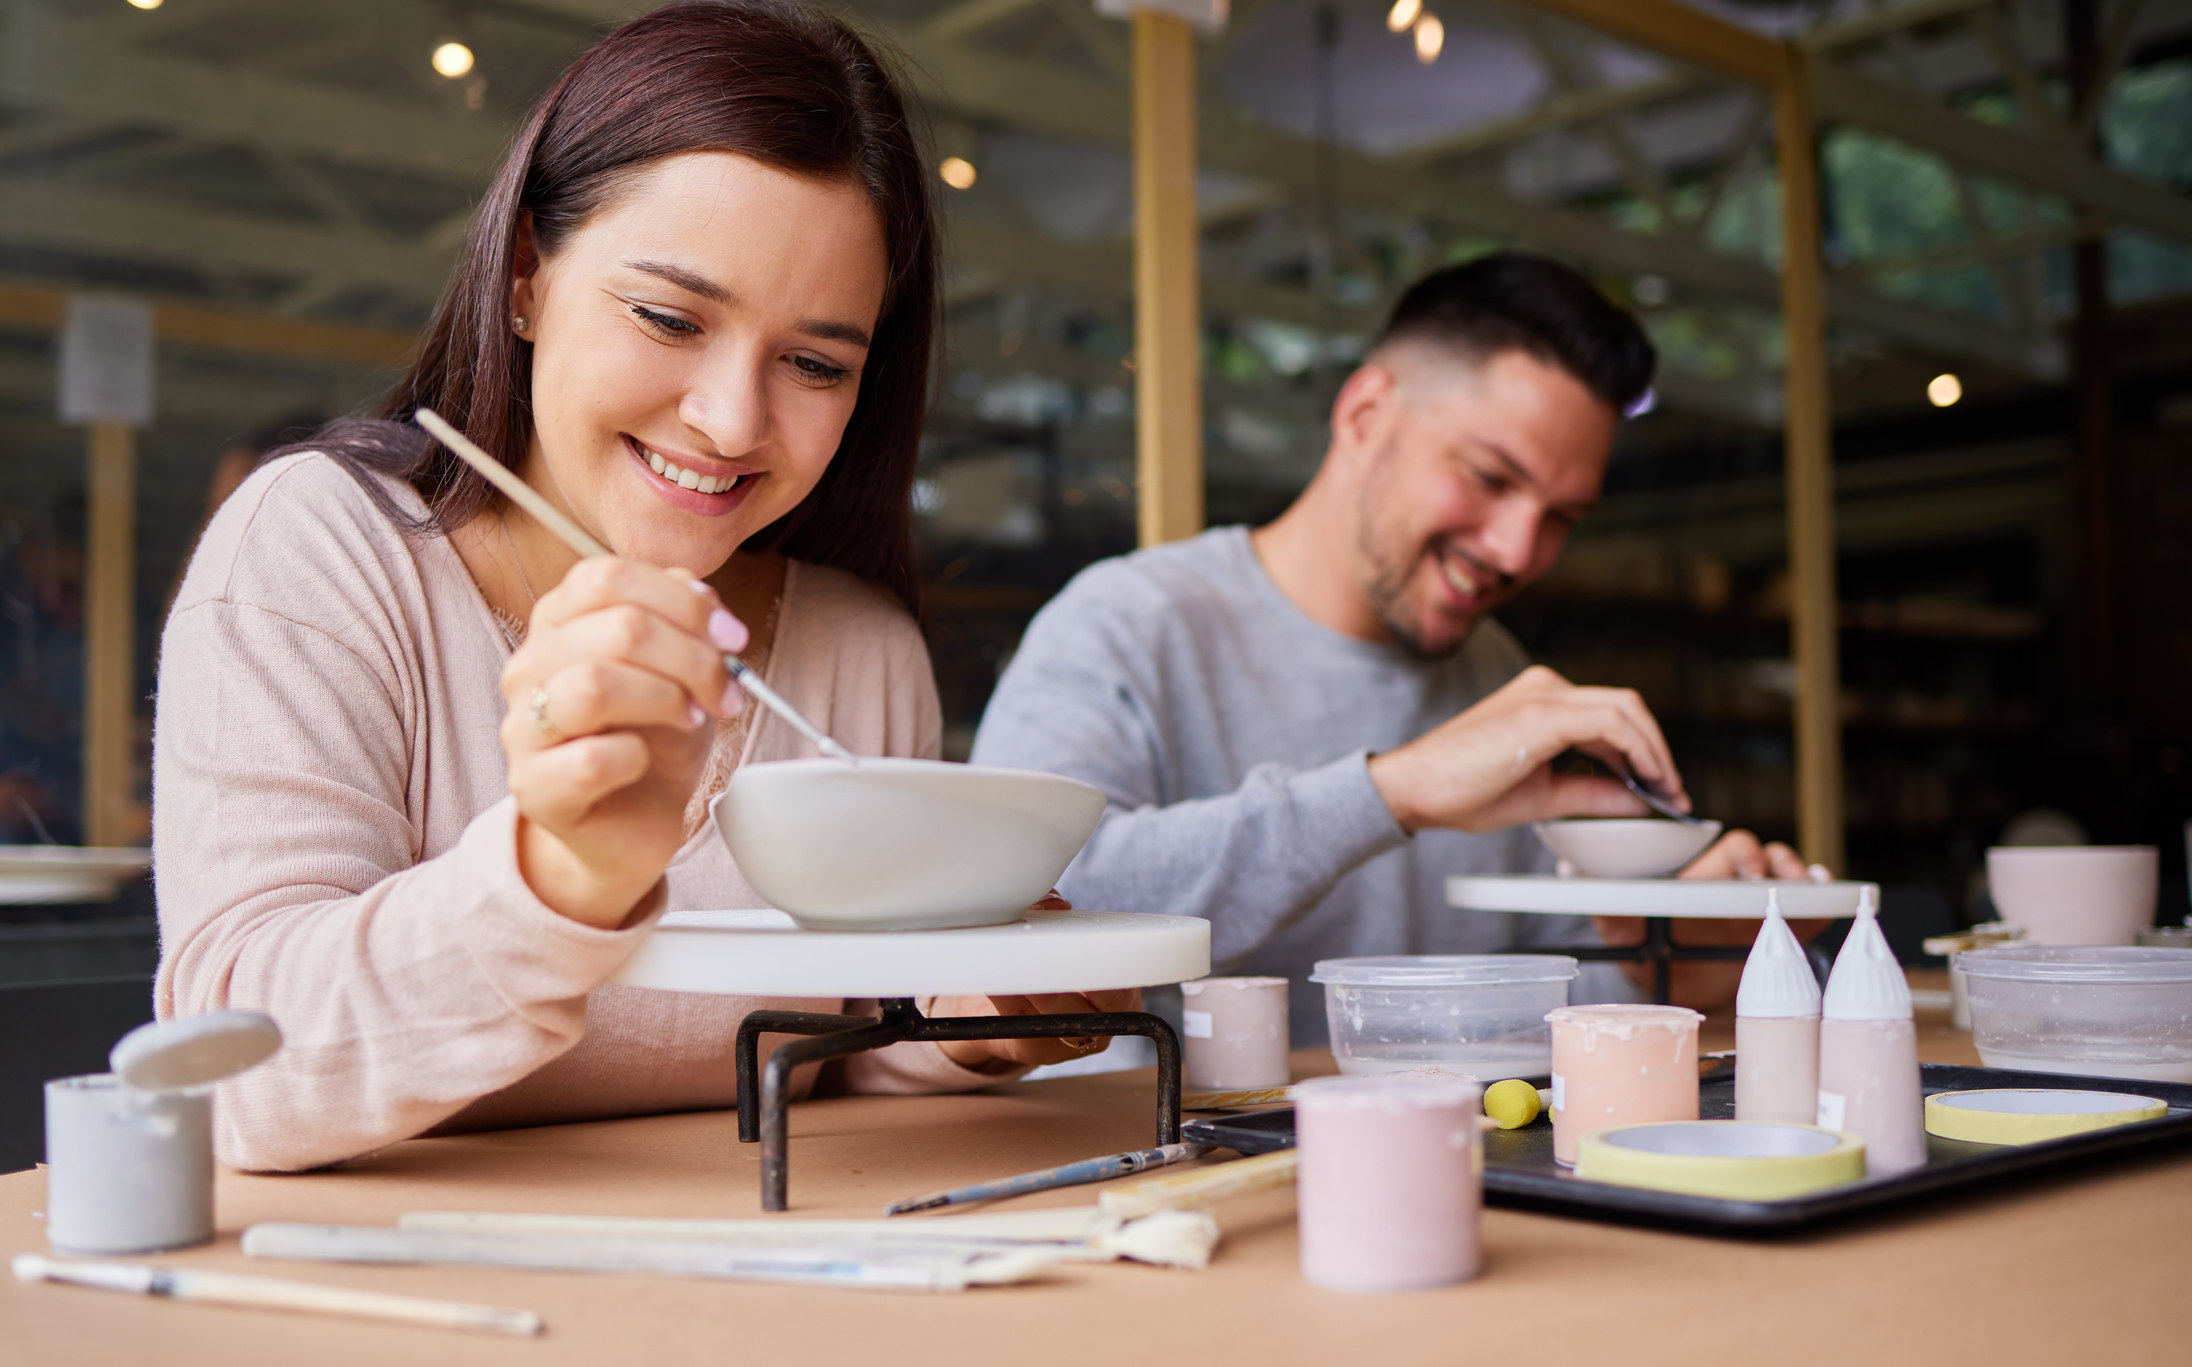 A man and a women are painting pottery together.